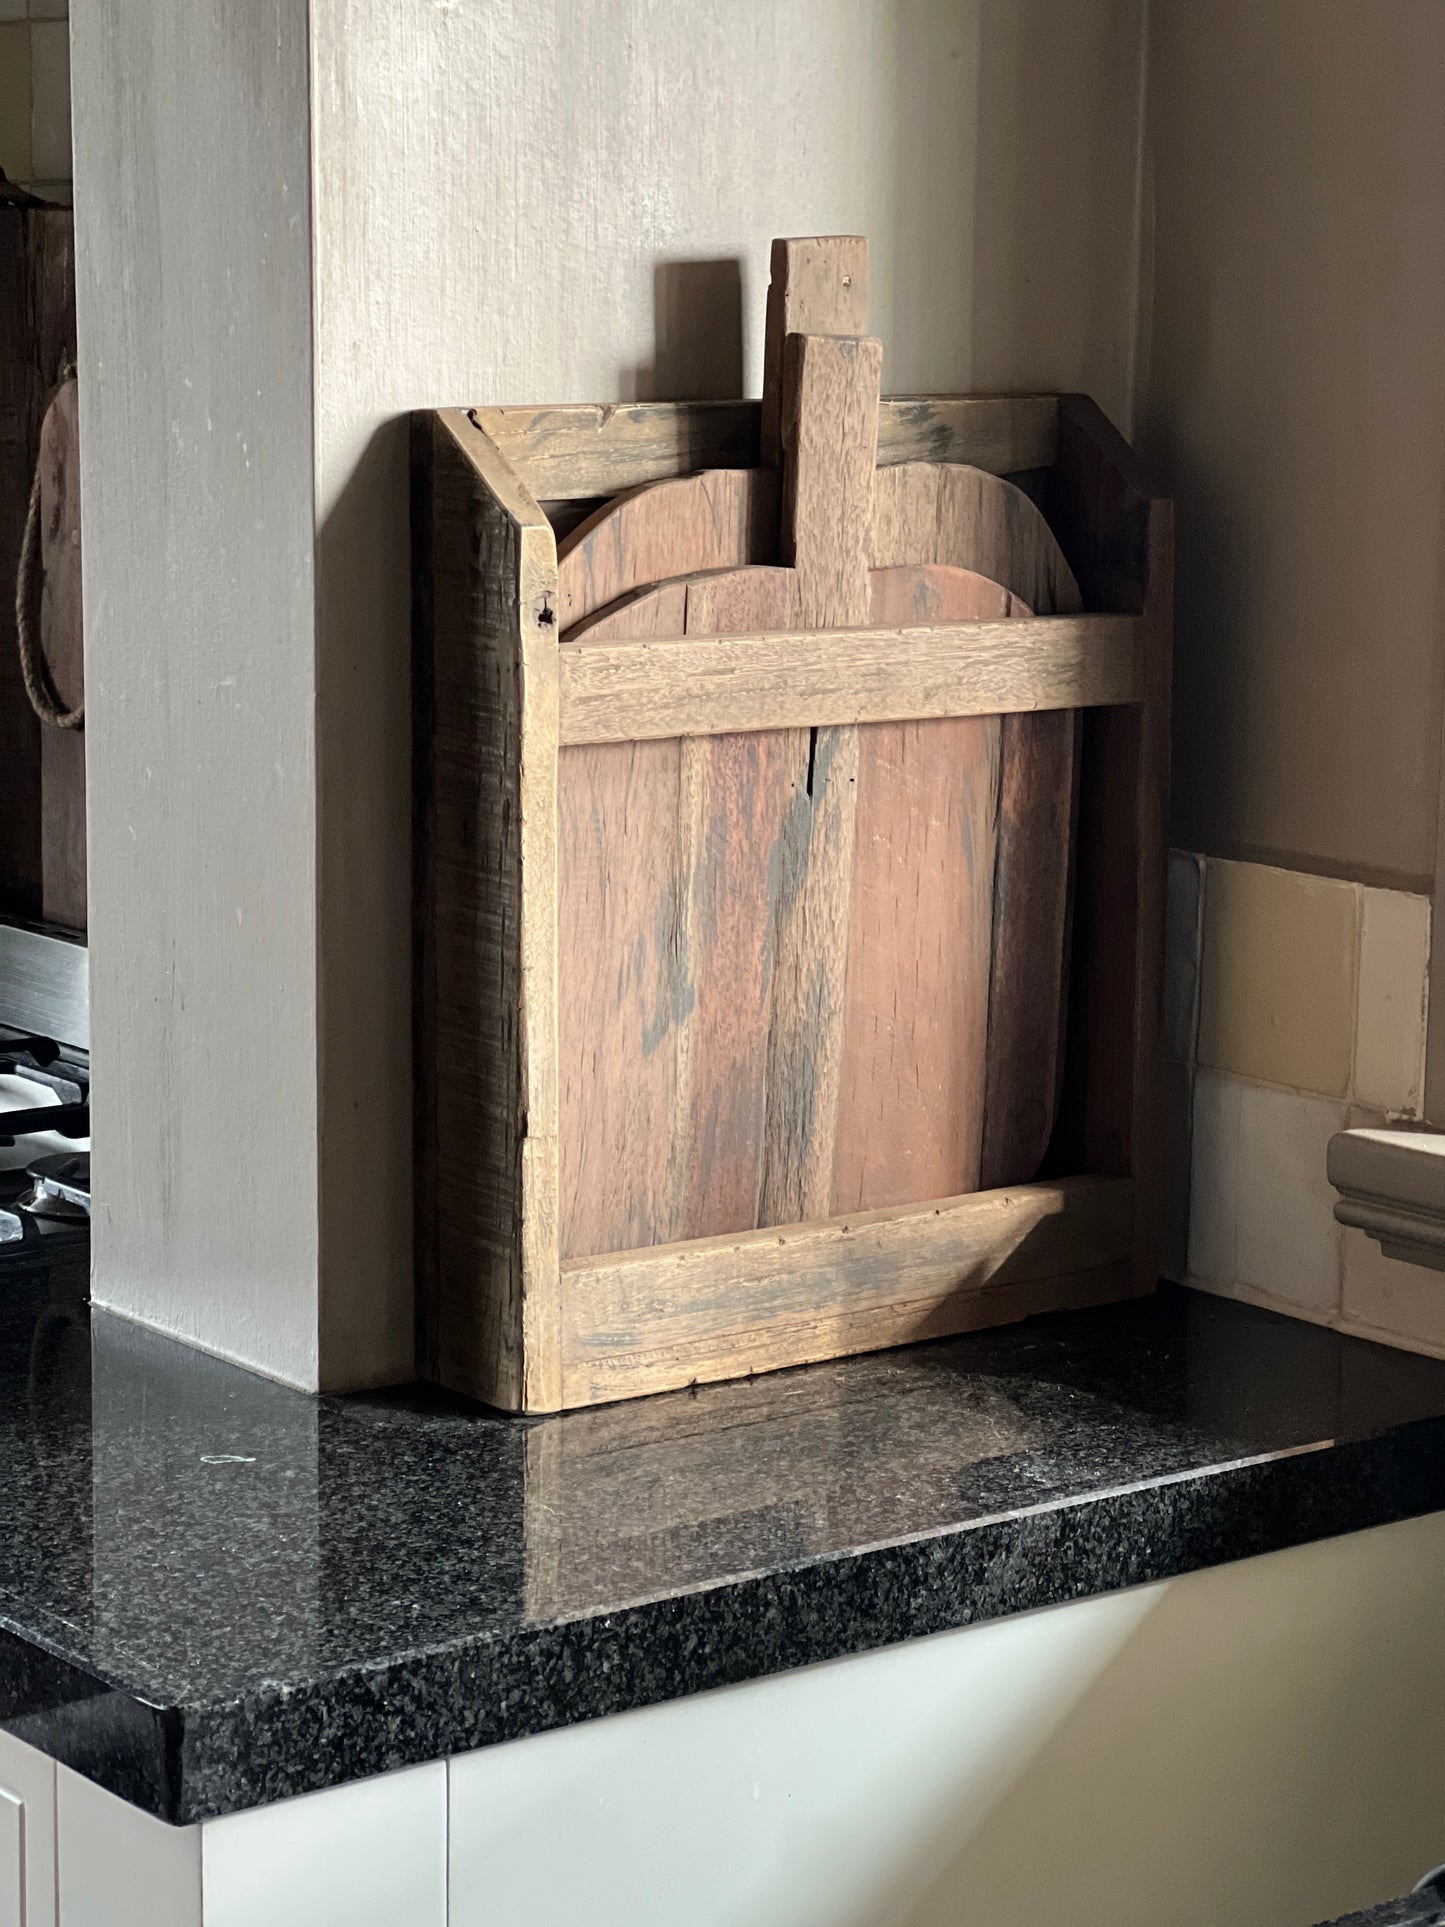 Cutting boards in holder